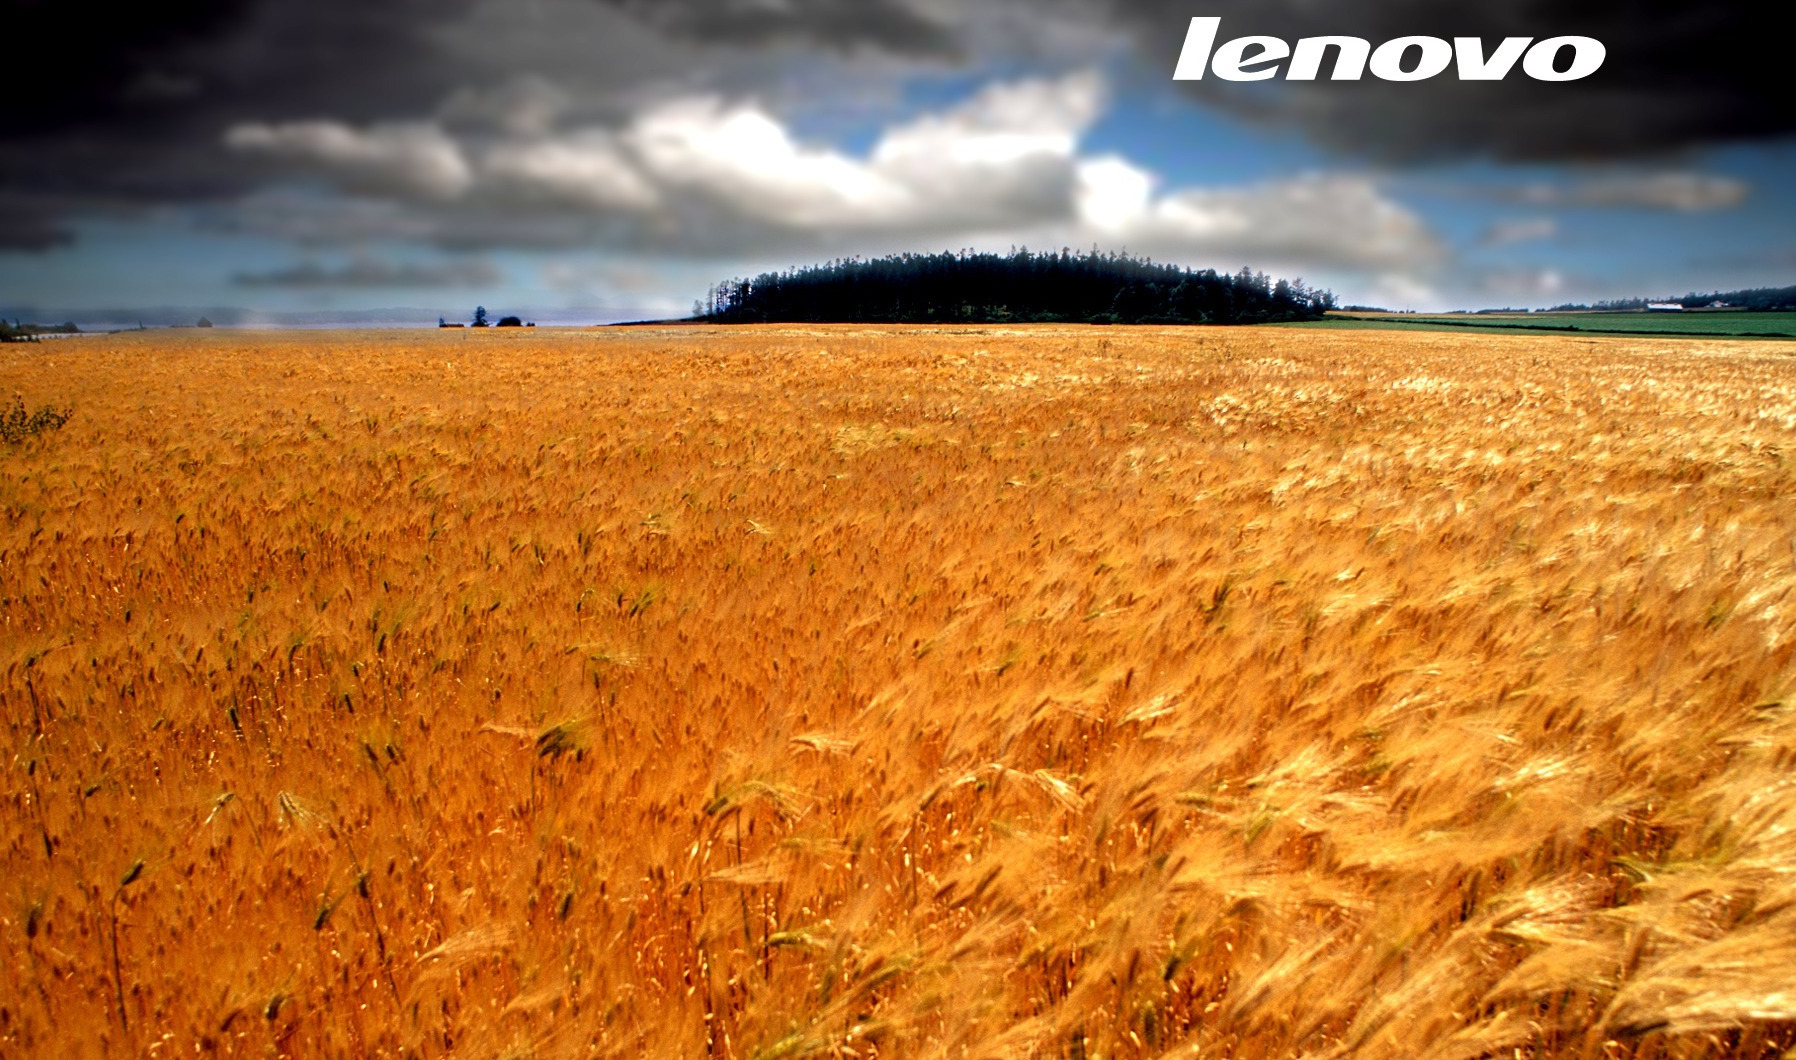 27 Handpicked Lenovo  Wallpapers  Backgrounds  In HD For Free 